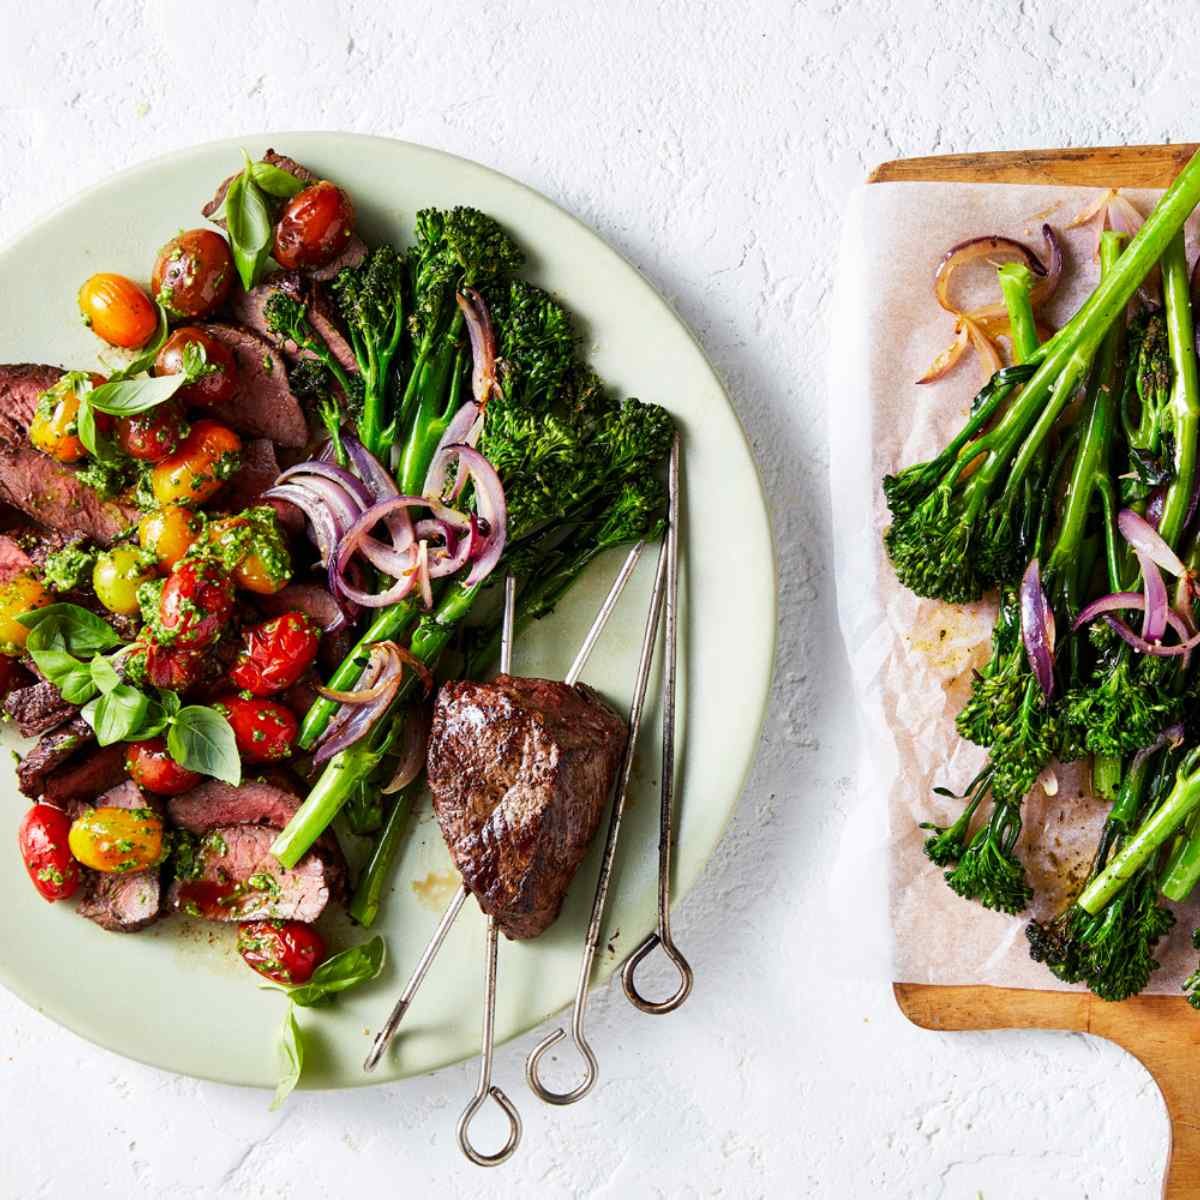 A green plate with rump roast on skewers, onions, tomatoes and Broccolini. Wooden board with Broccolini next to it.